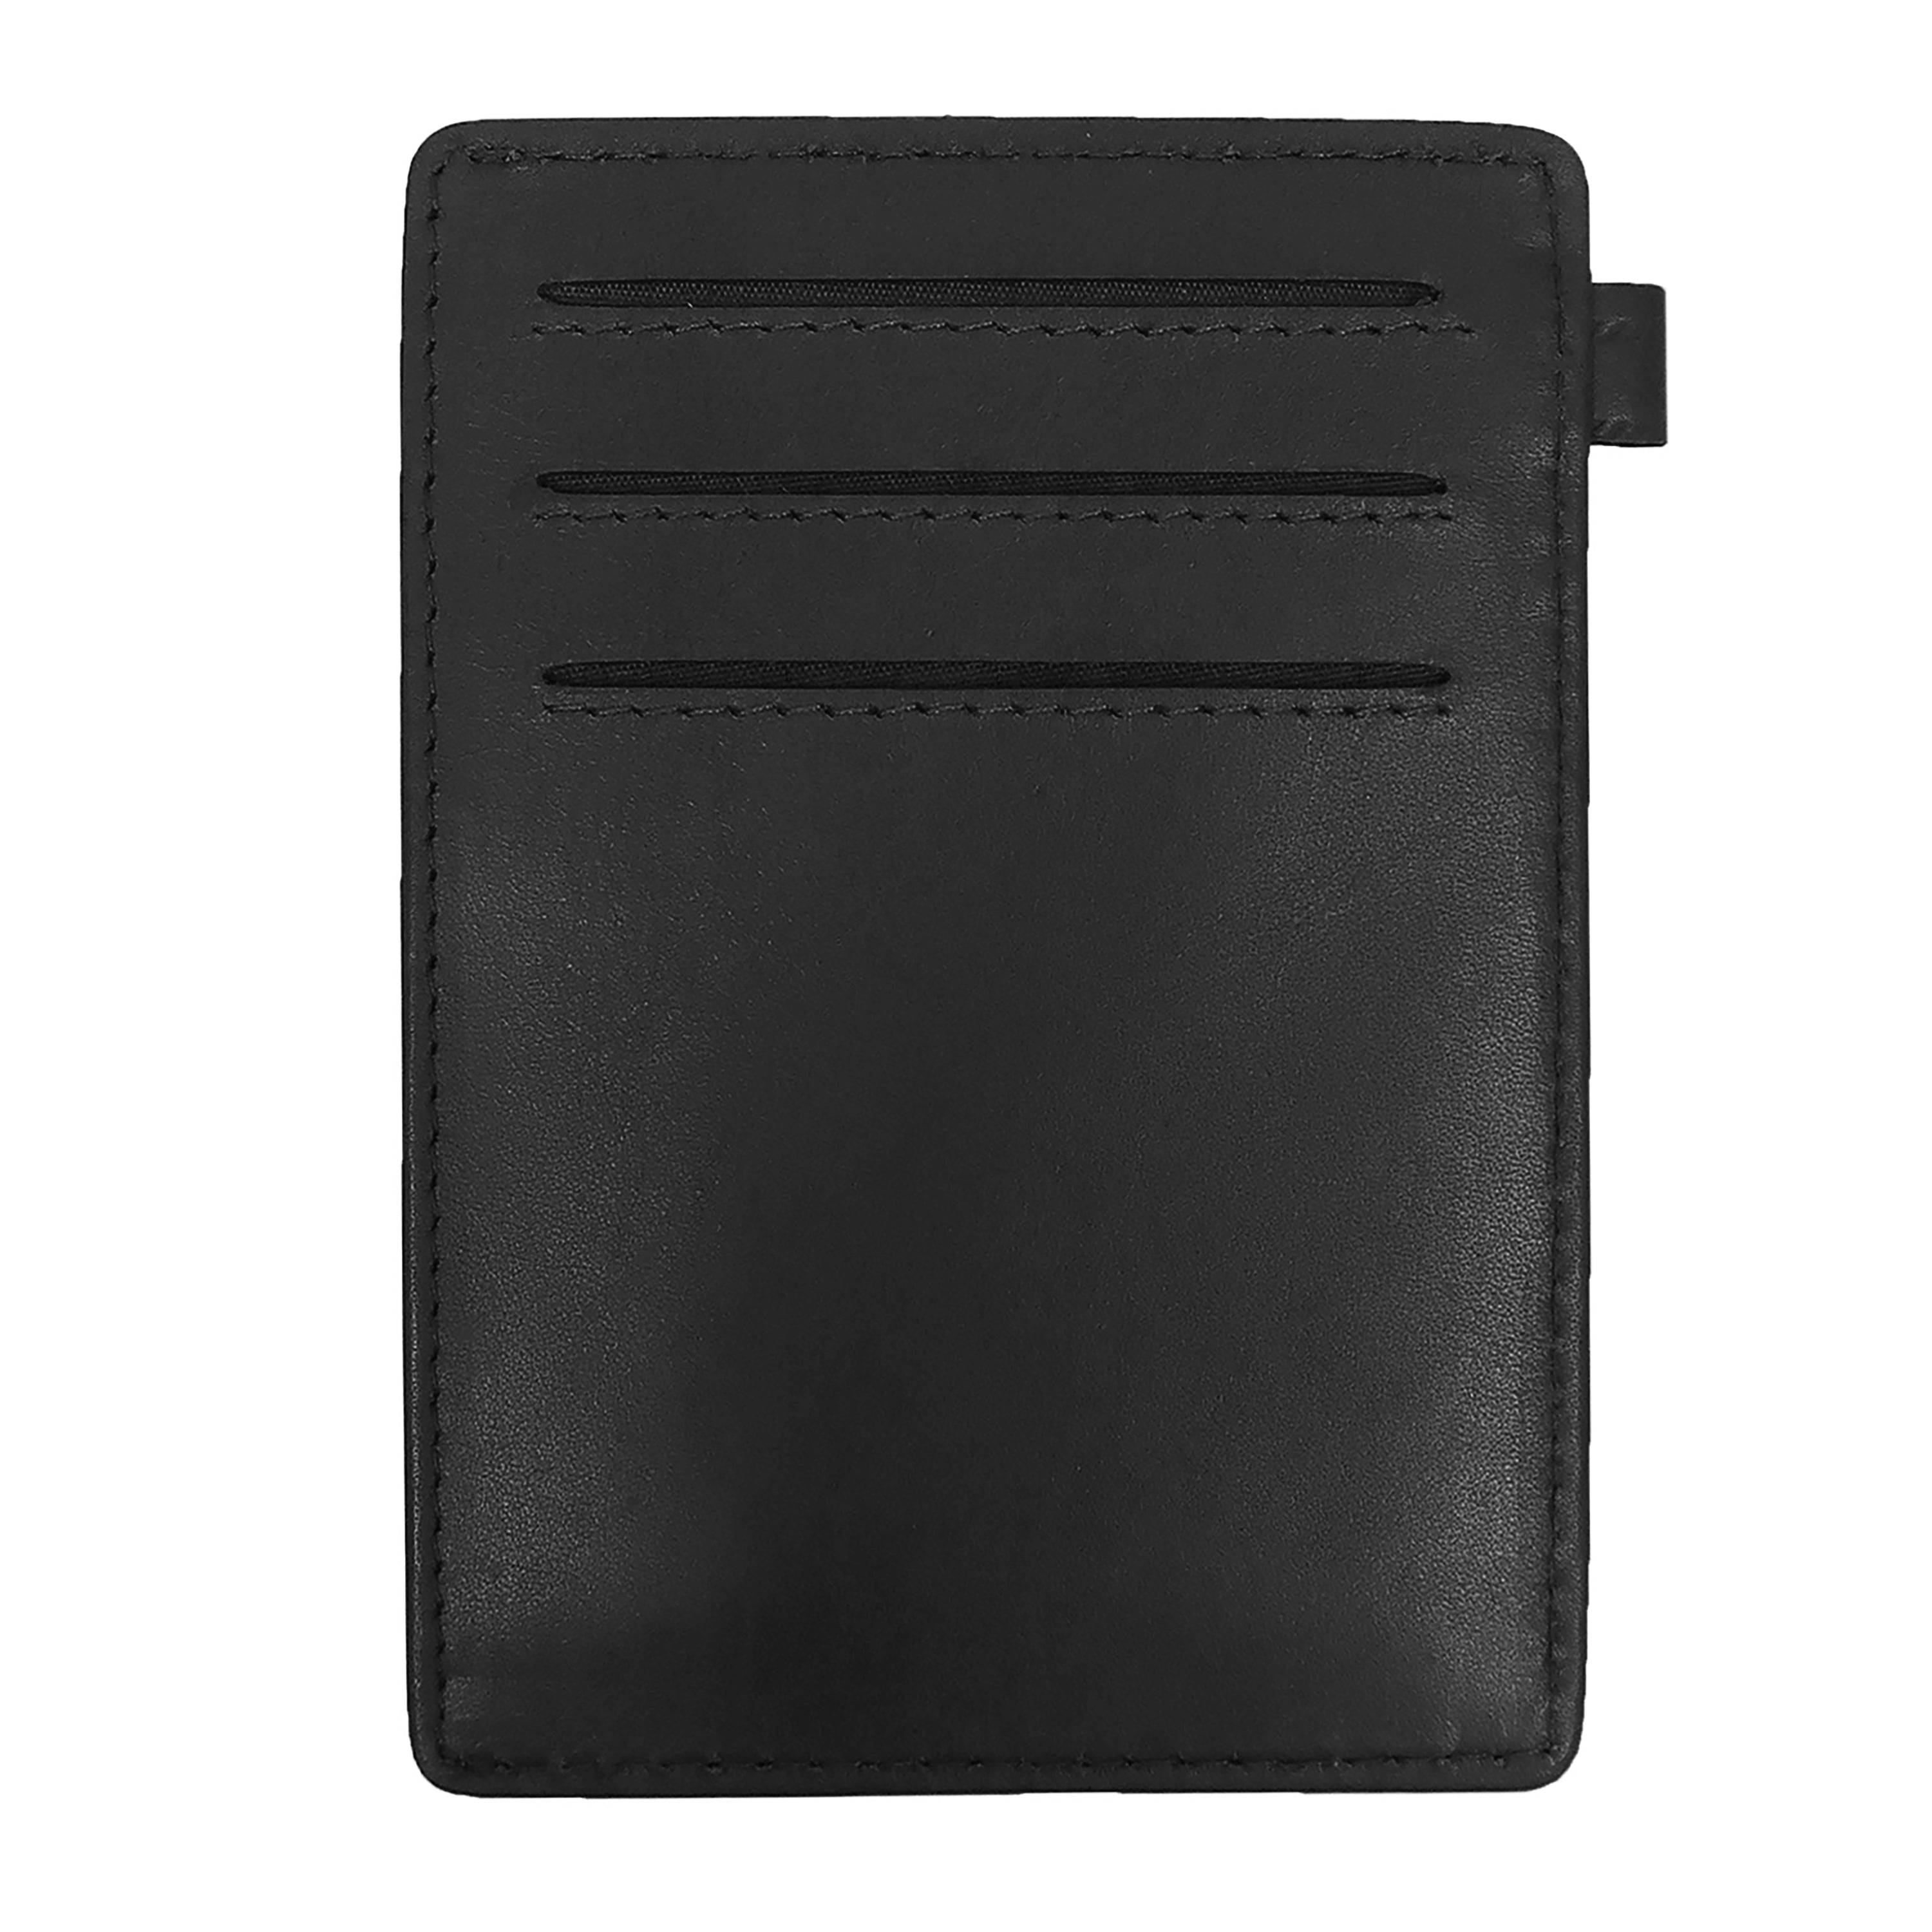 a black leather wallet with a card holder